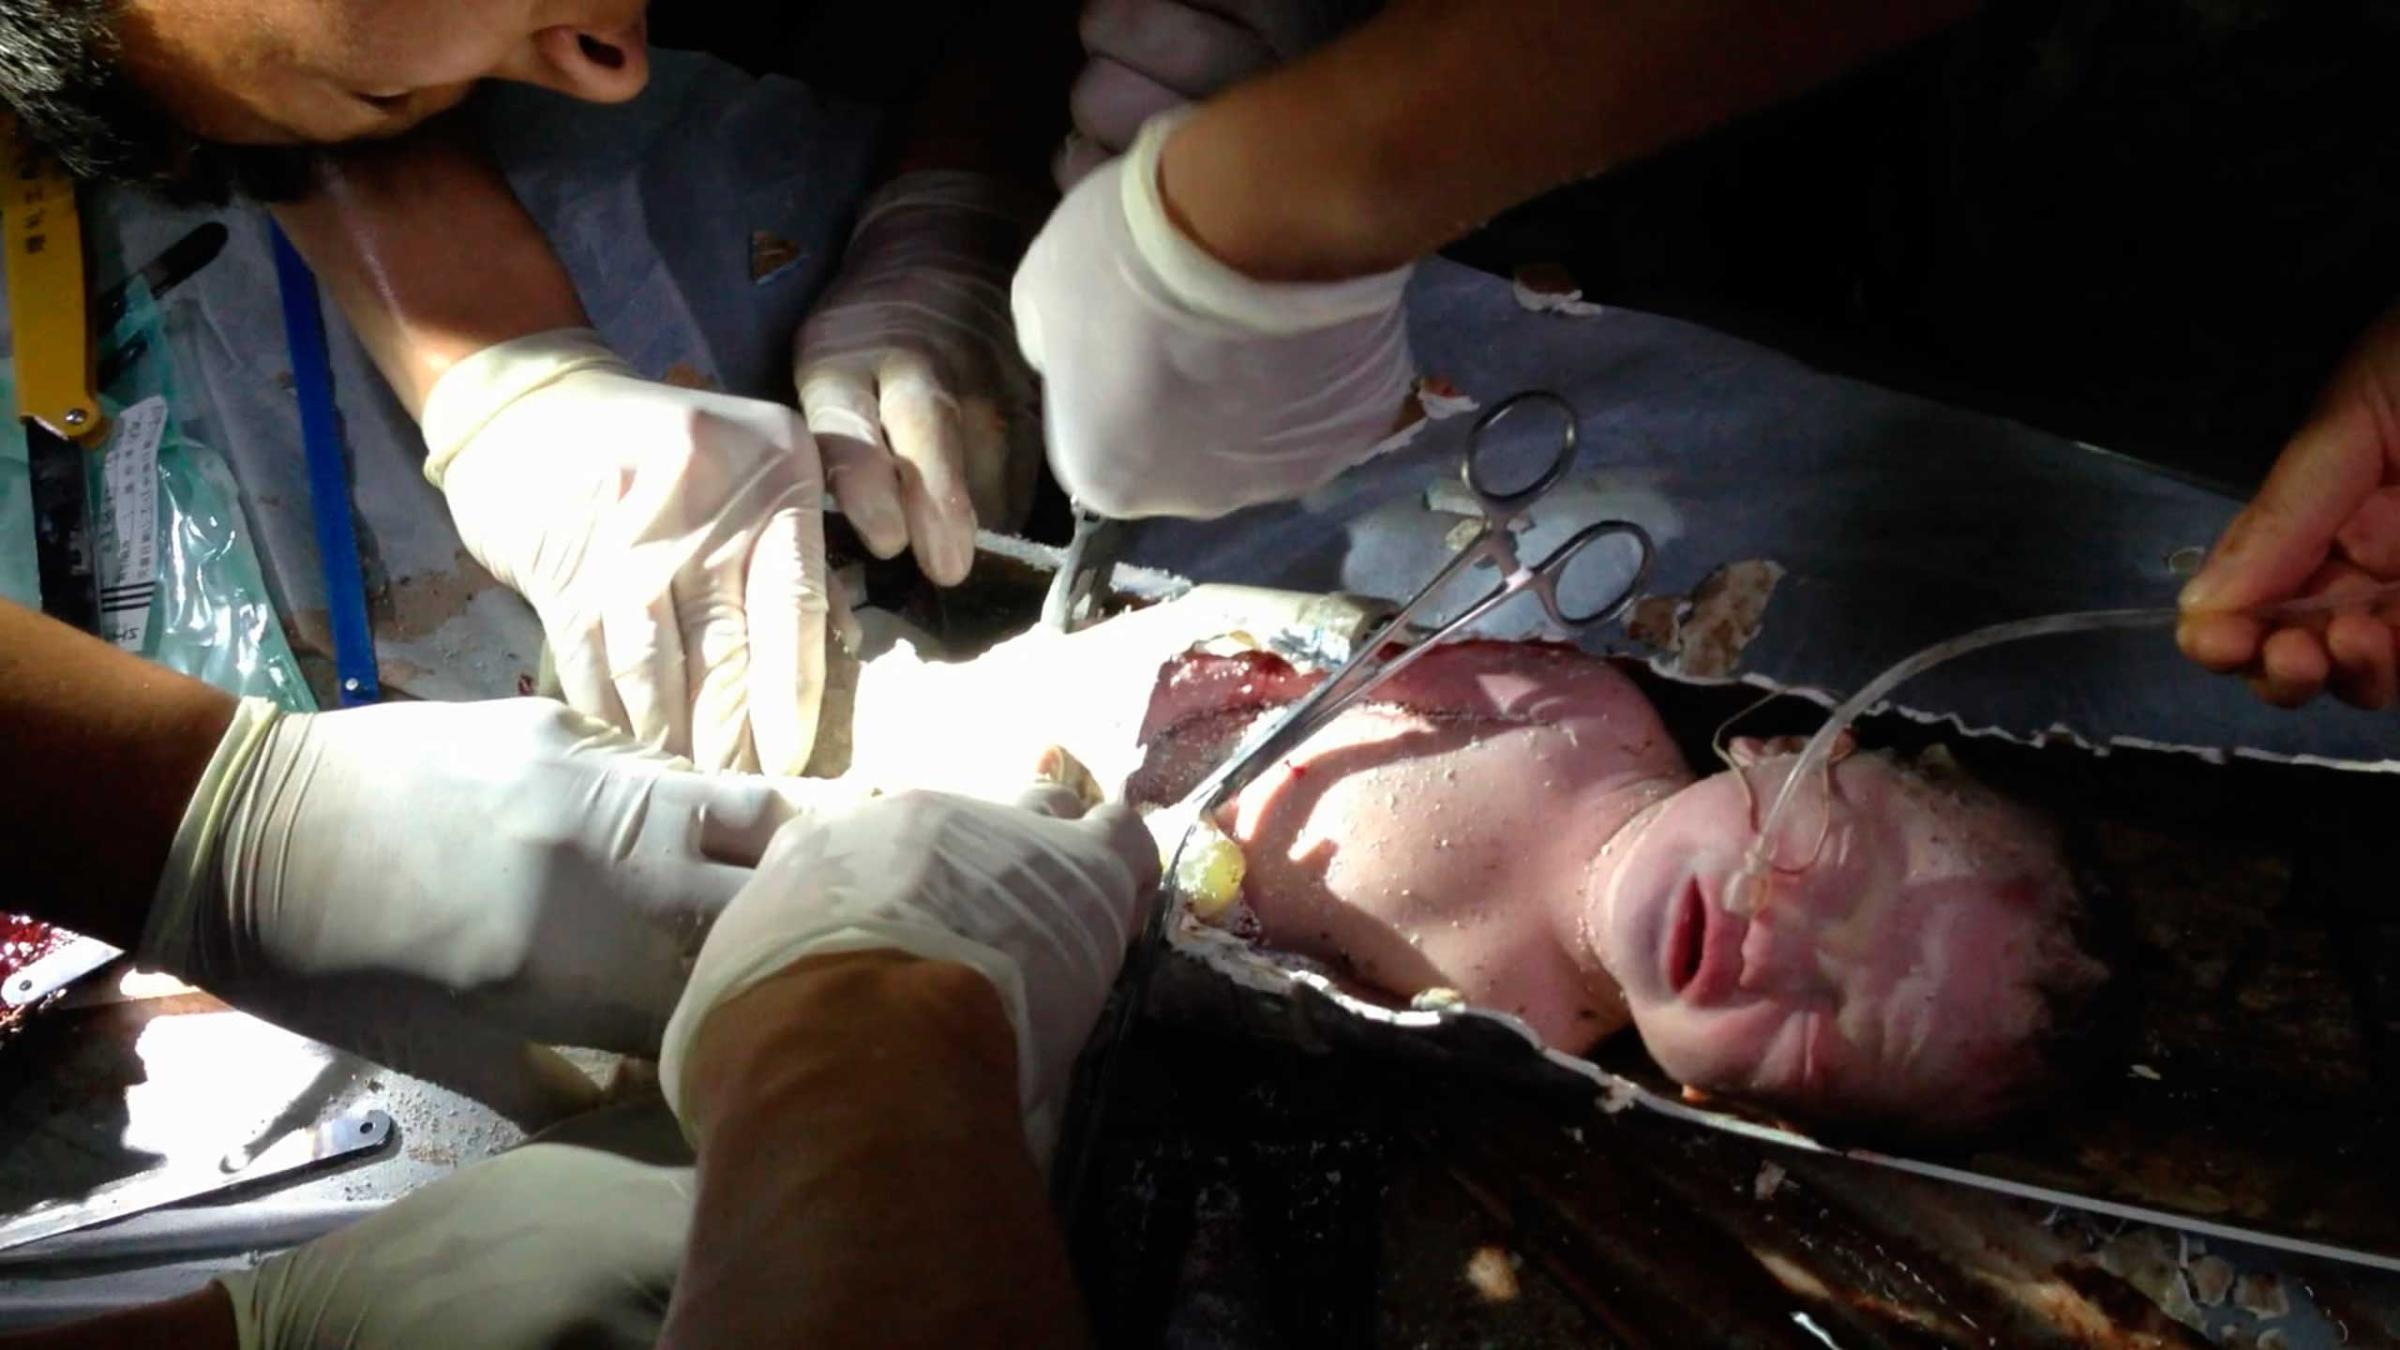 Firefighters and doctors rescue an abandoned newborn baby boy by cutting away a sewage pipe piece by piece, in this still image taken from video, at a hospital in Jinhua